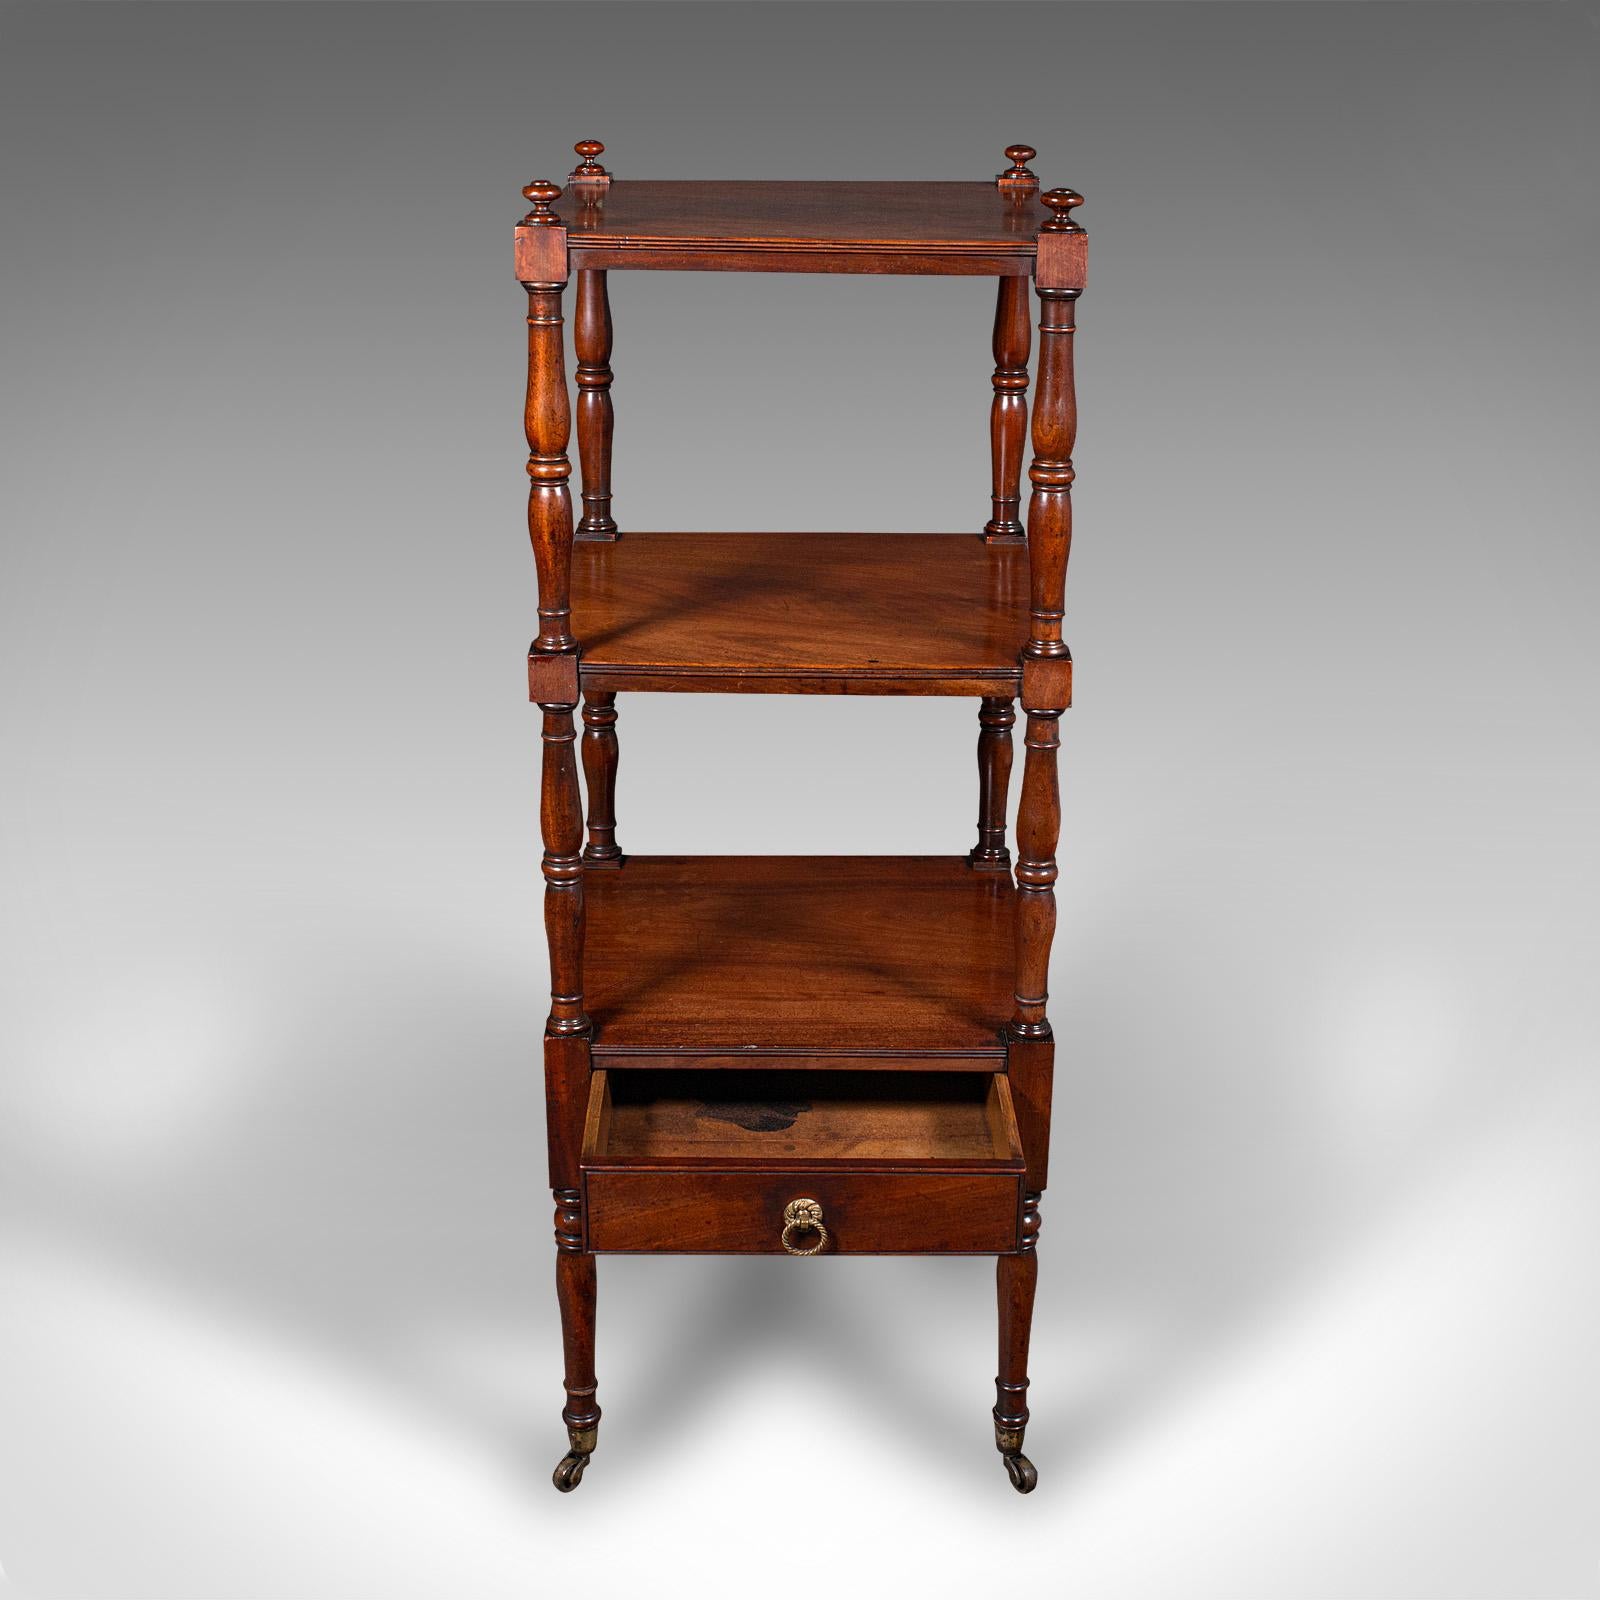 British Antique 3 Tier Whatnot, English, Open Display Stand, Late Georgian, Circa 1800 For Sale